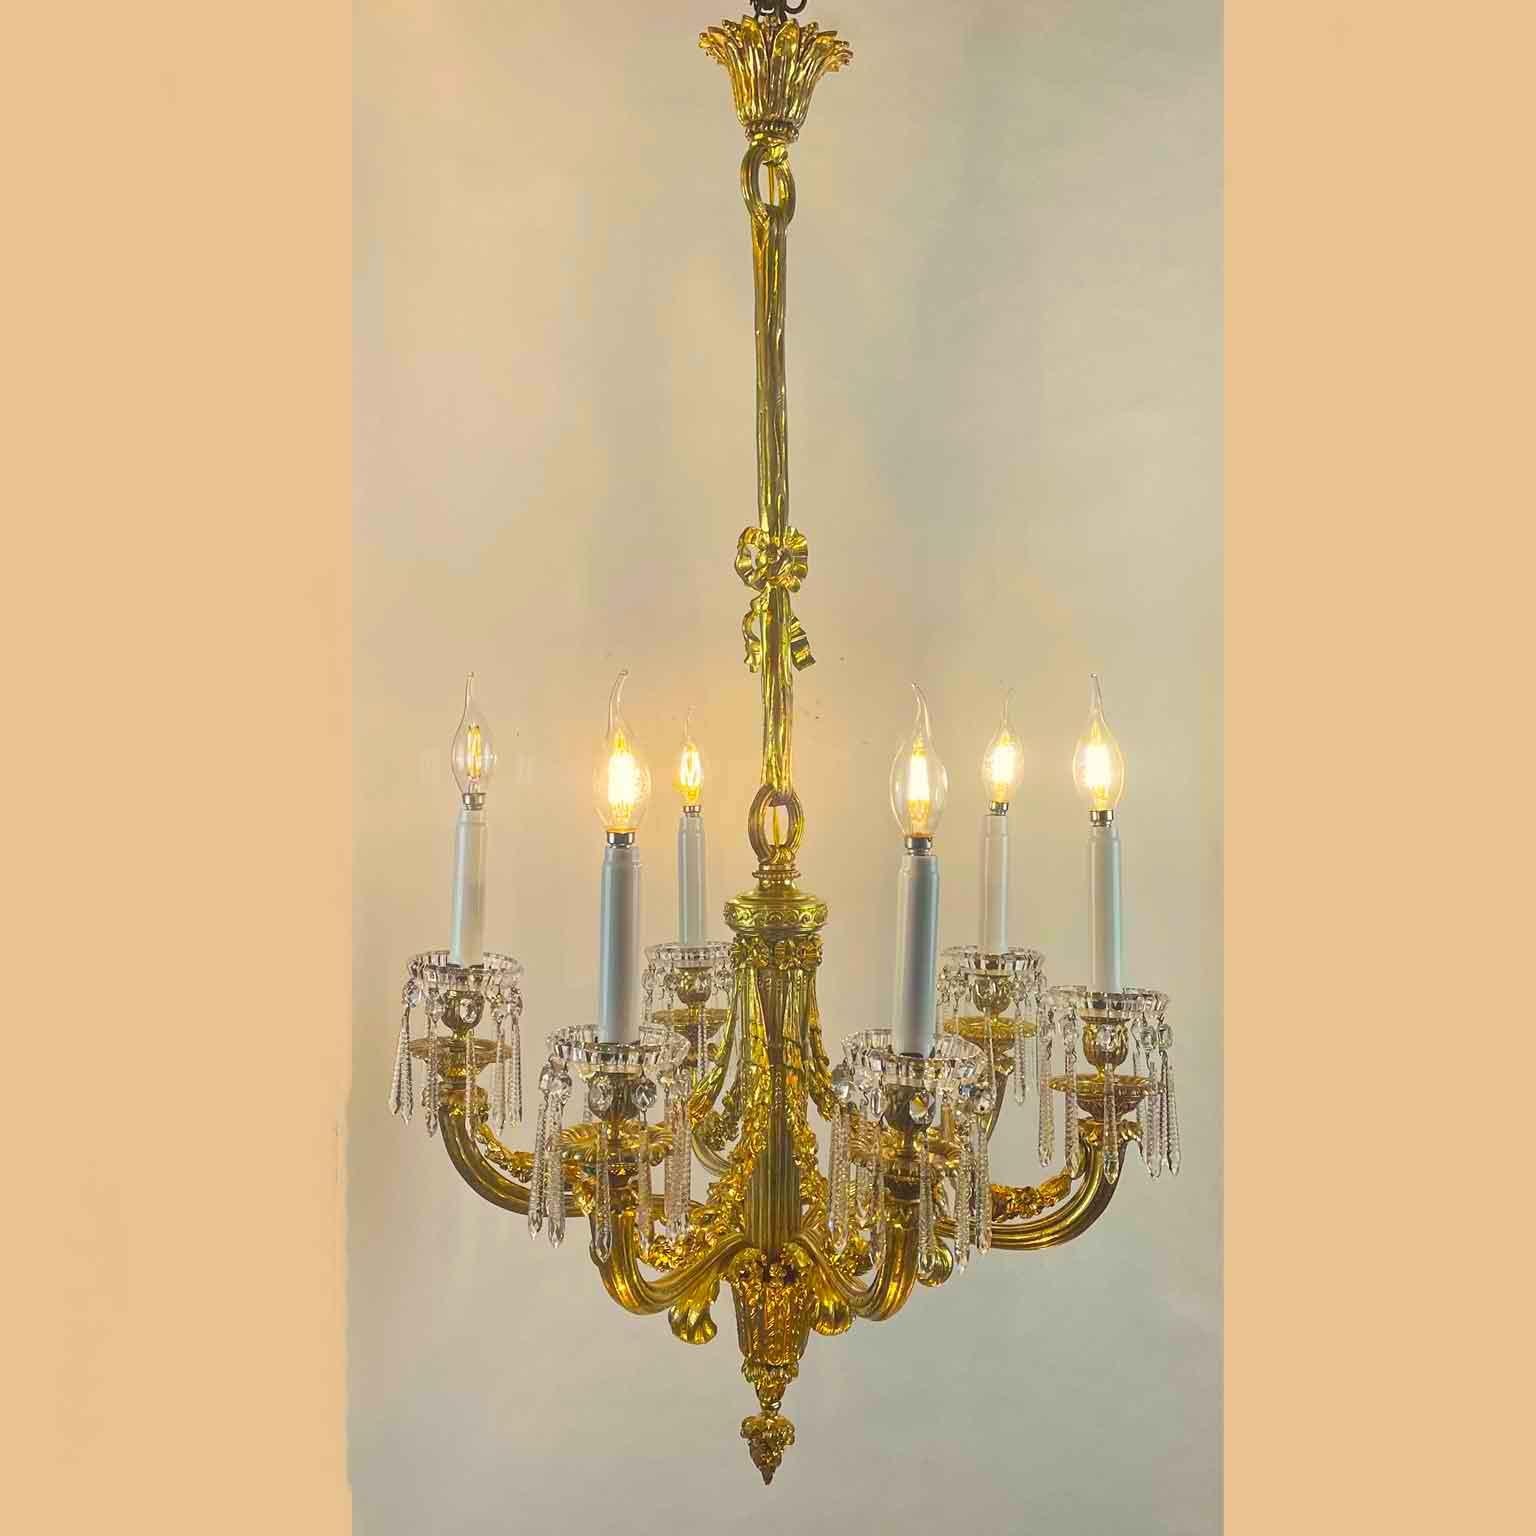 Baccarat Crystal and Ormolu Chandelier French 20th Century Empire Style Pendant 7